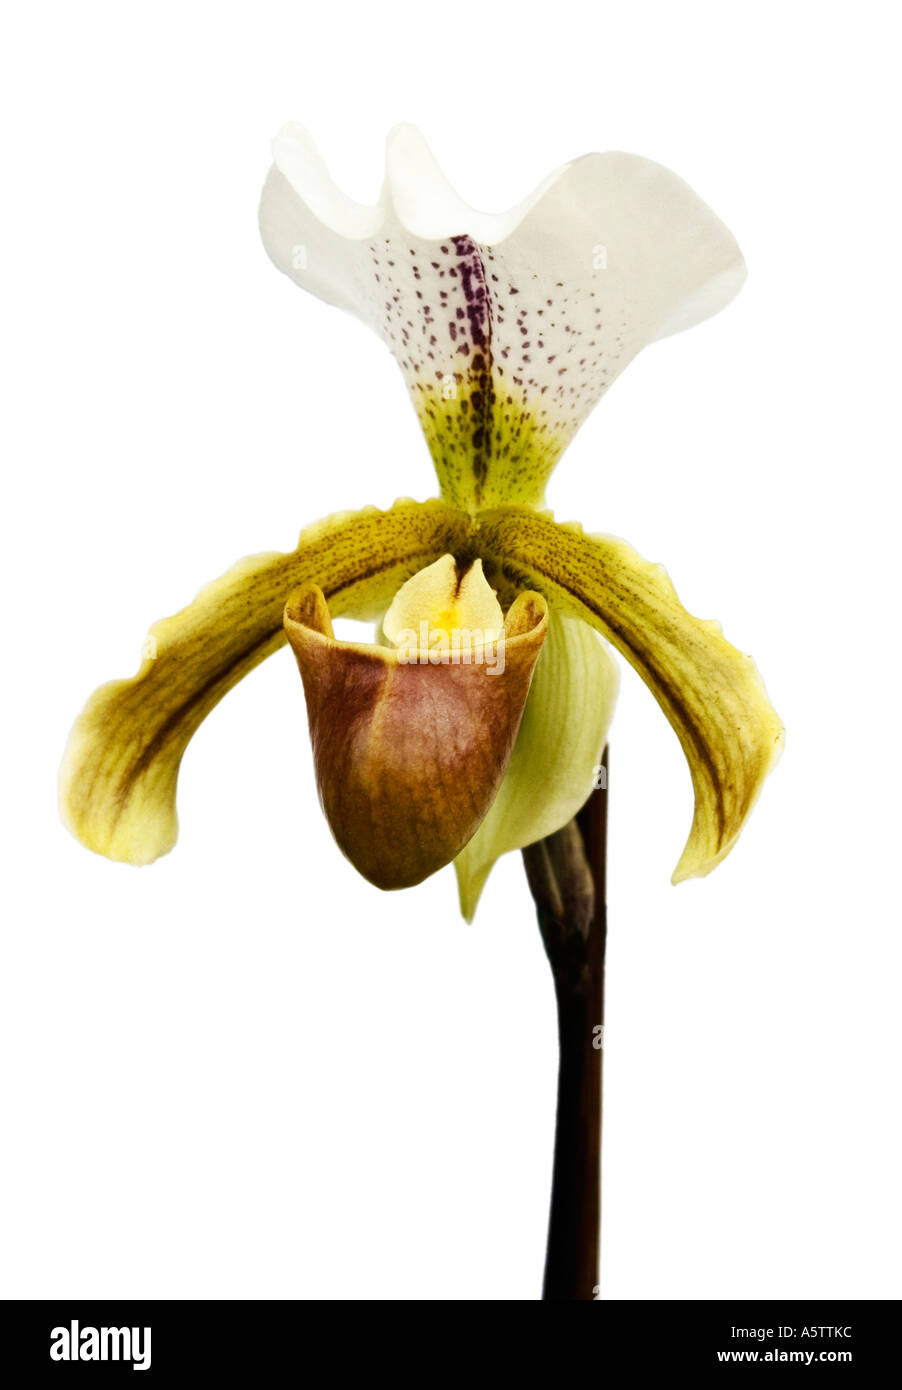 An unusual Orchid flower on white background. Stock Photo